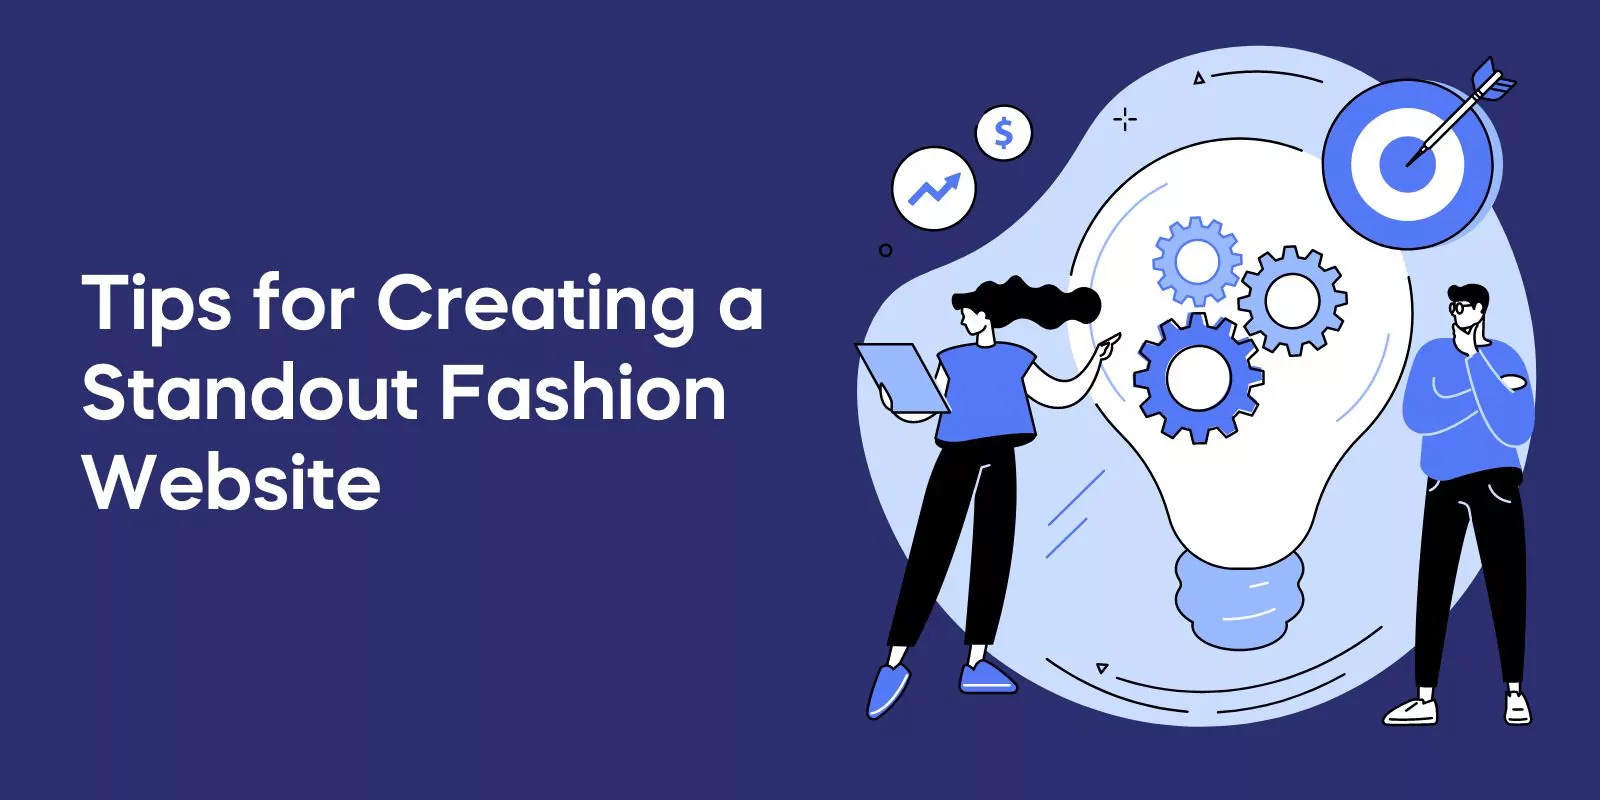 Tips for Creating a Standout Fashion Website